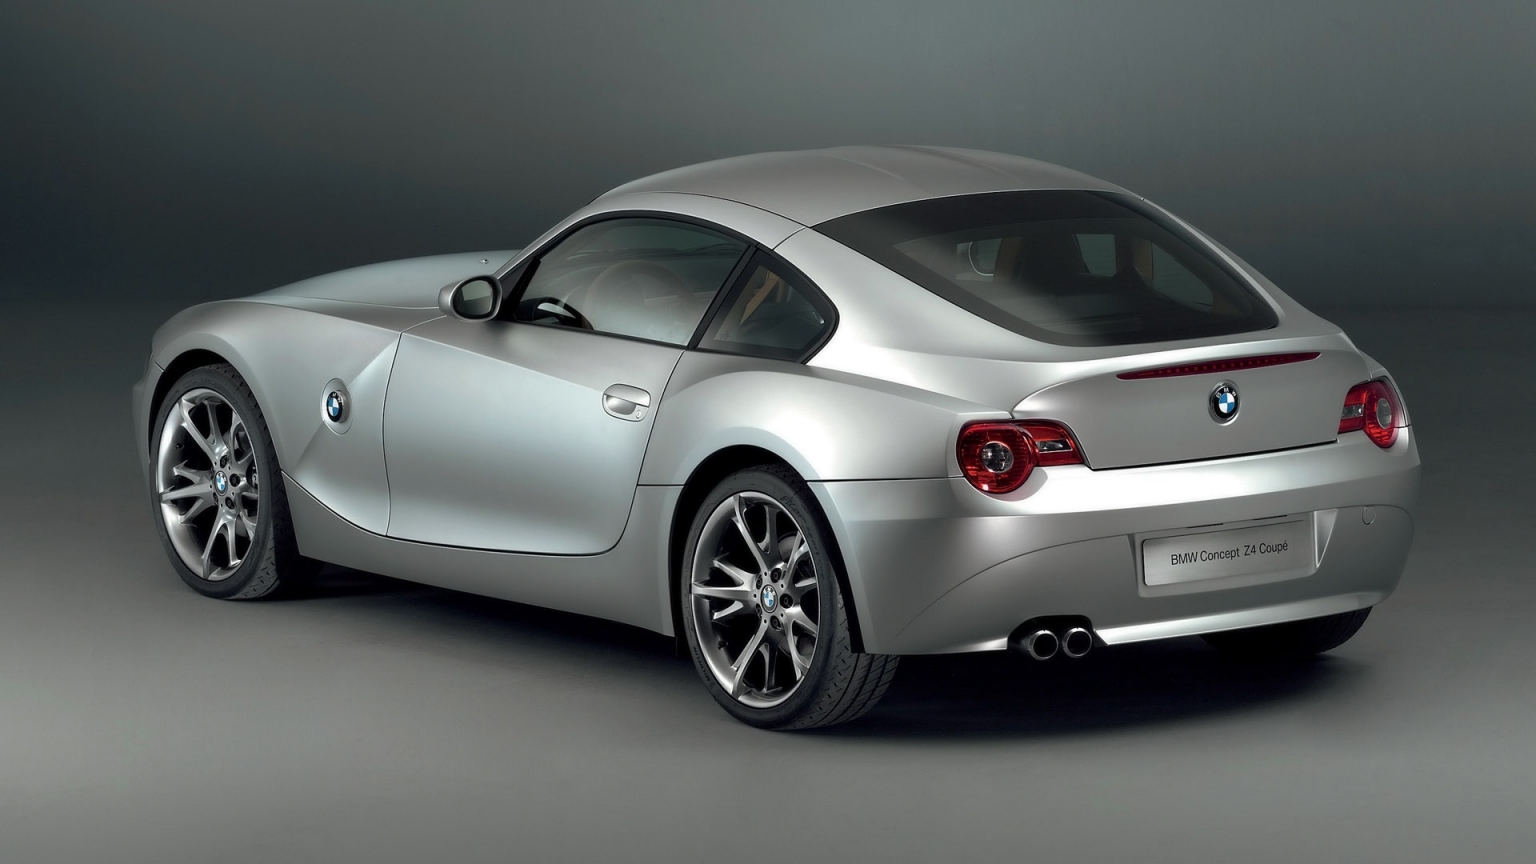 BMW Z4 Coupe Concept RA 2005 for 1536 x 864 HDTV resolution